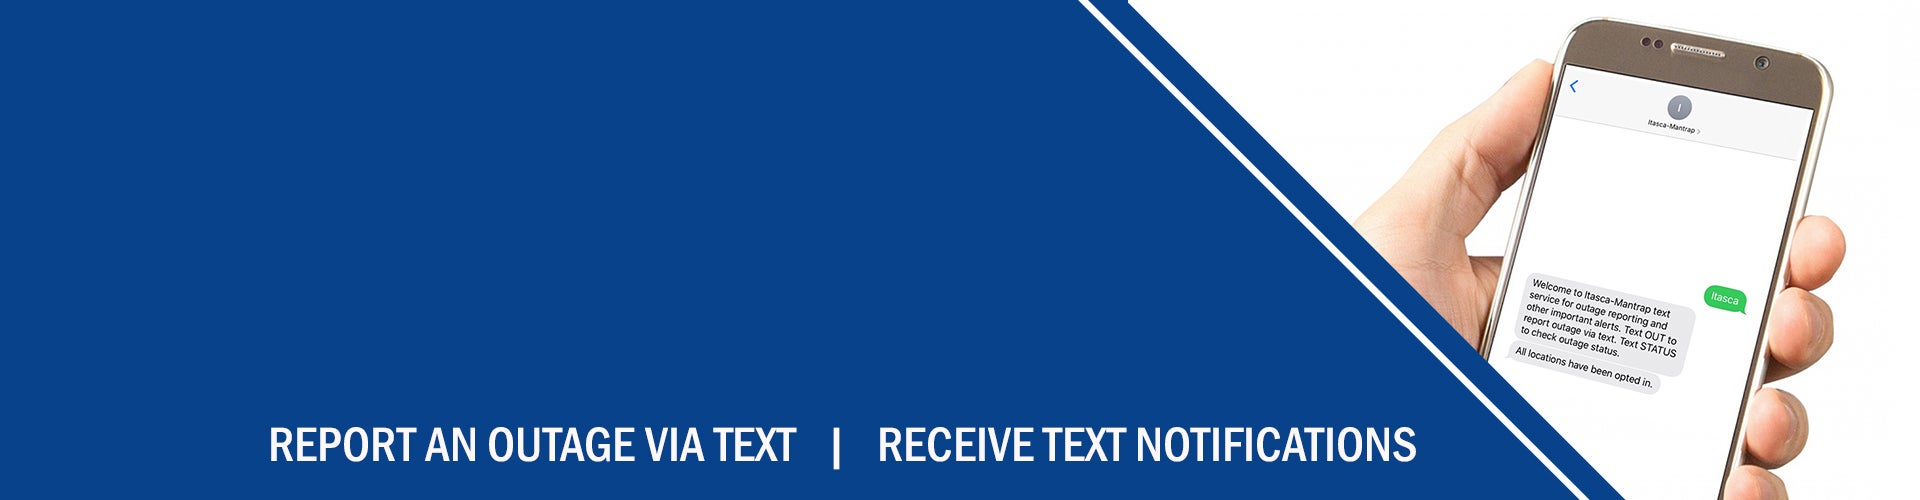 Sign up for Itasca-Mantrap text notifications